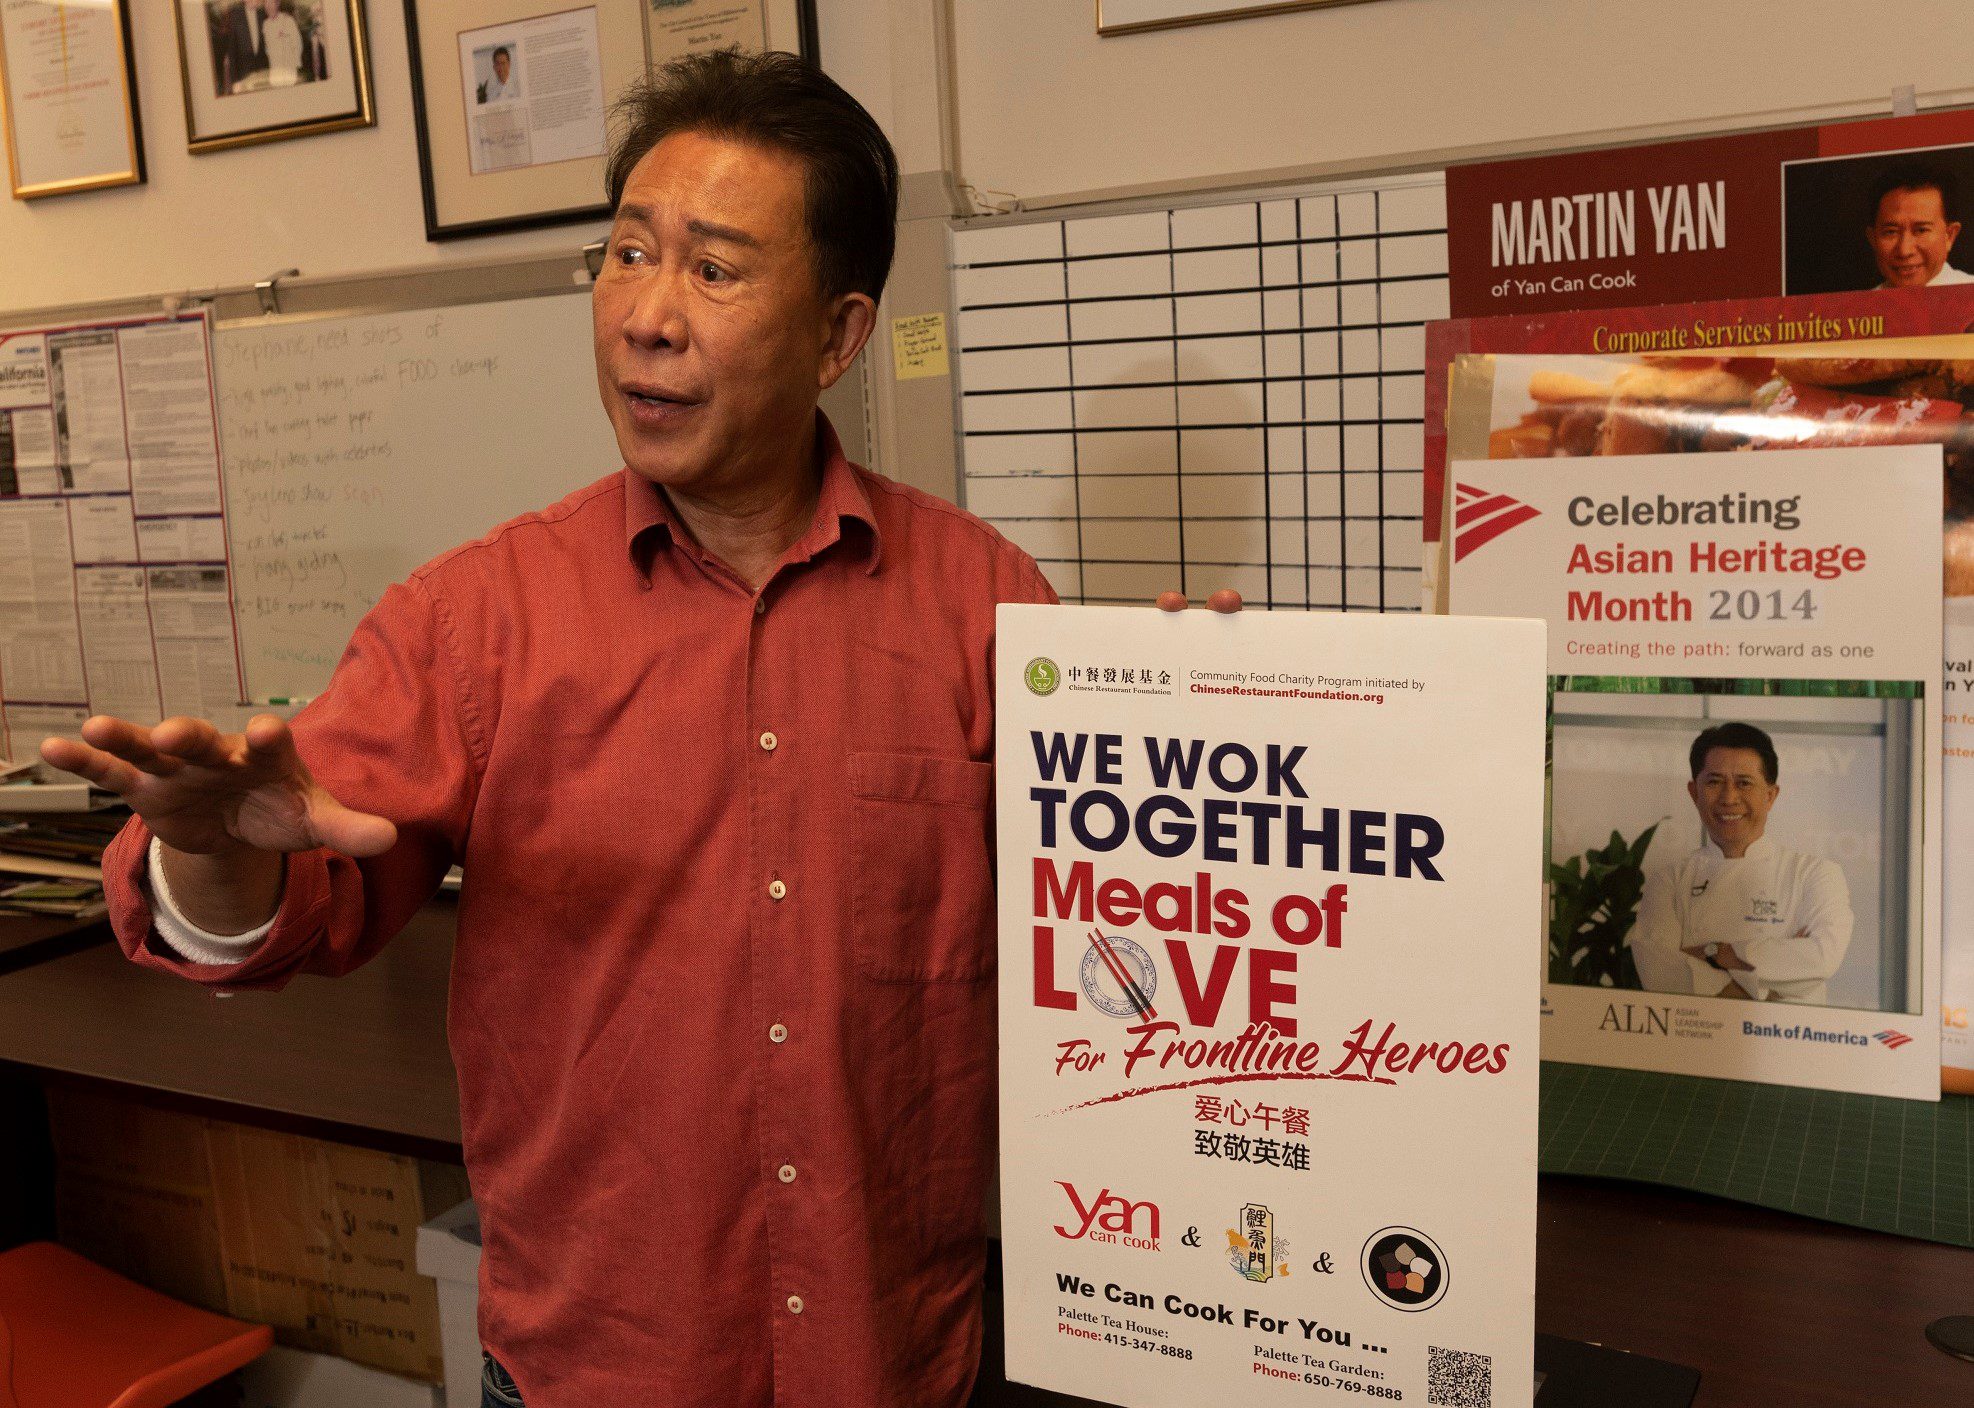 Martin Yan shows a poster for Meals of Love